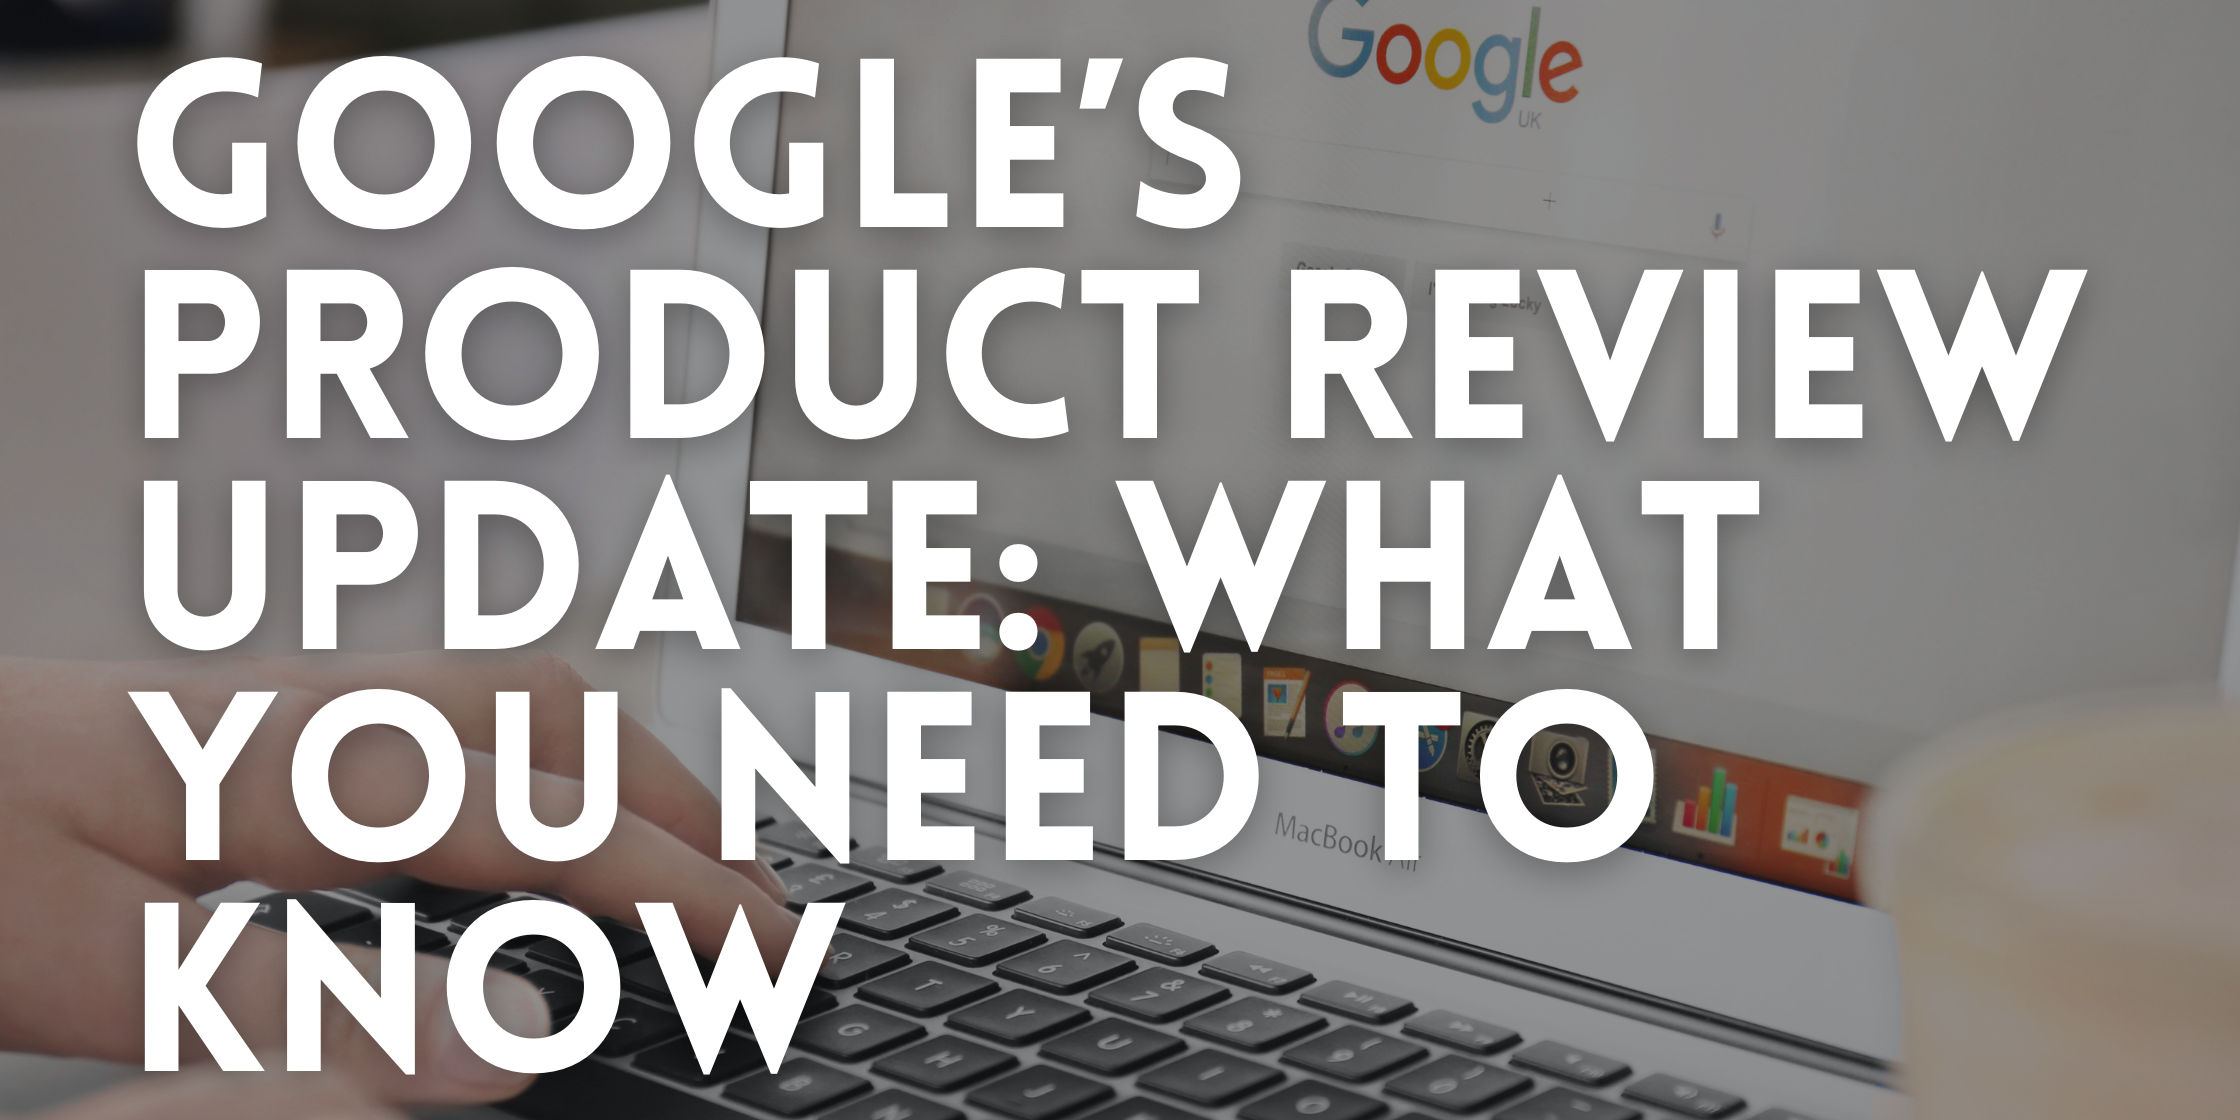 Google’s Product Review Update What You Need to Know WebEagles